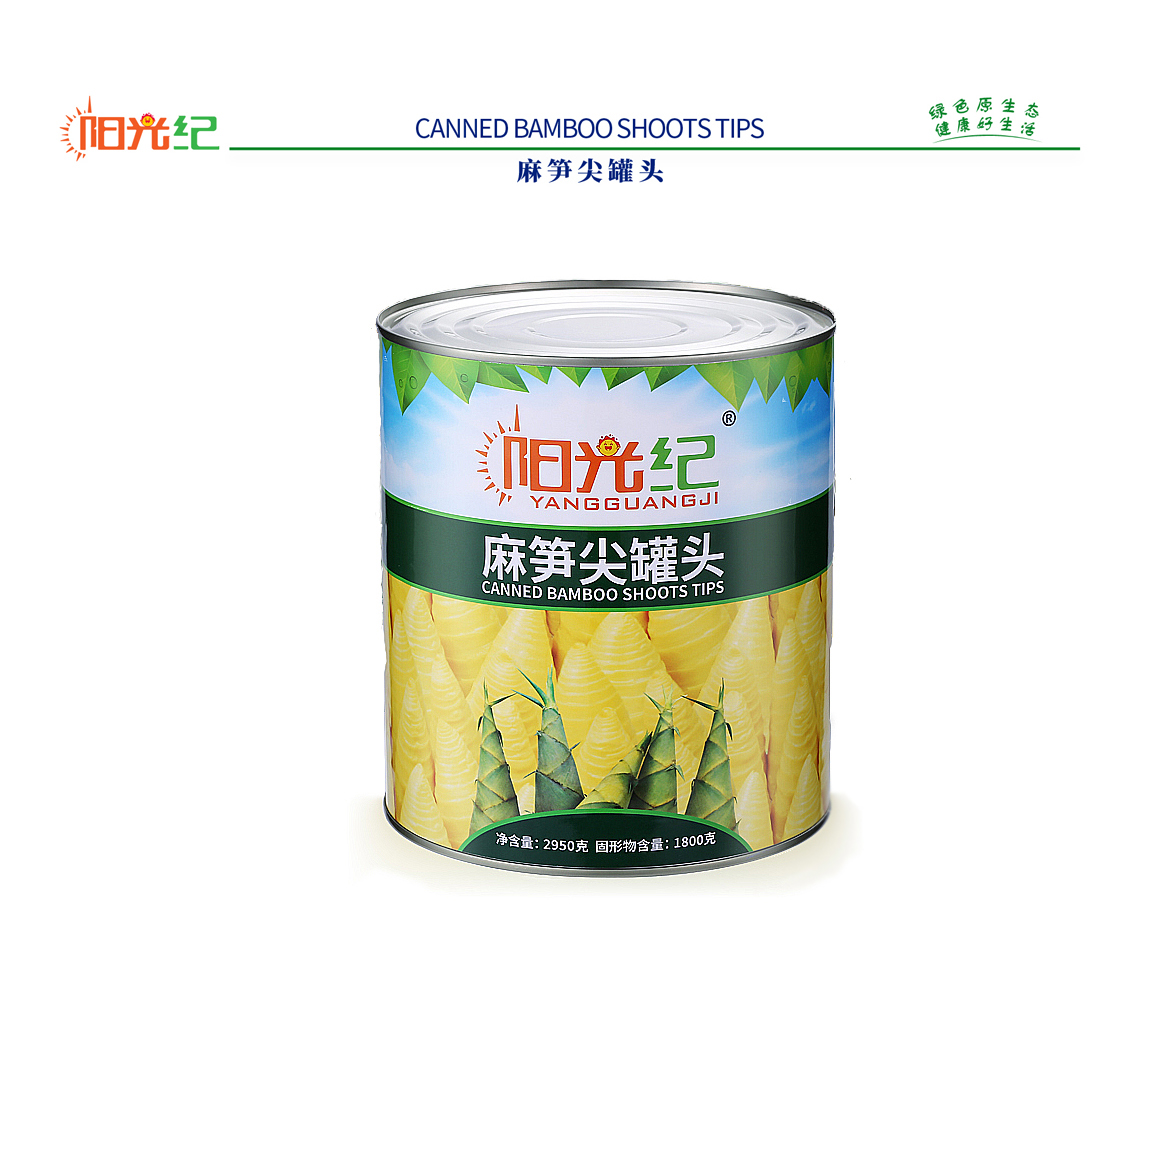 OEM CUSTOMIZED CANNED BAMBOO SHOOTS TIPS